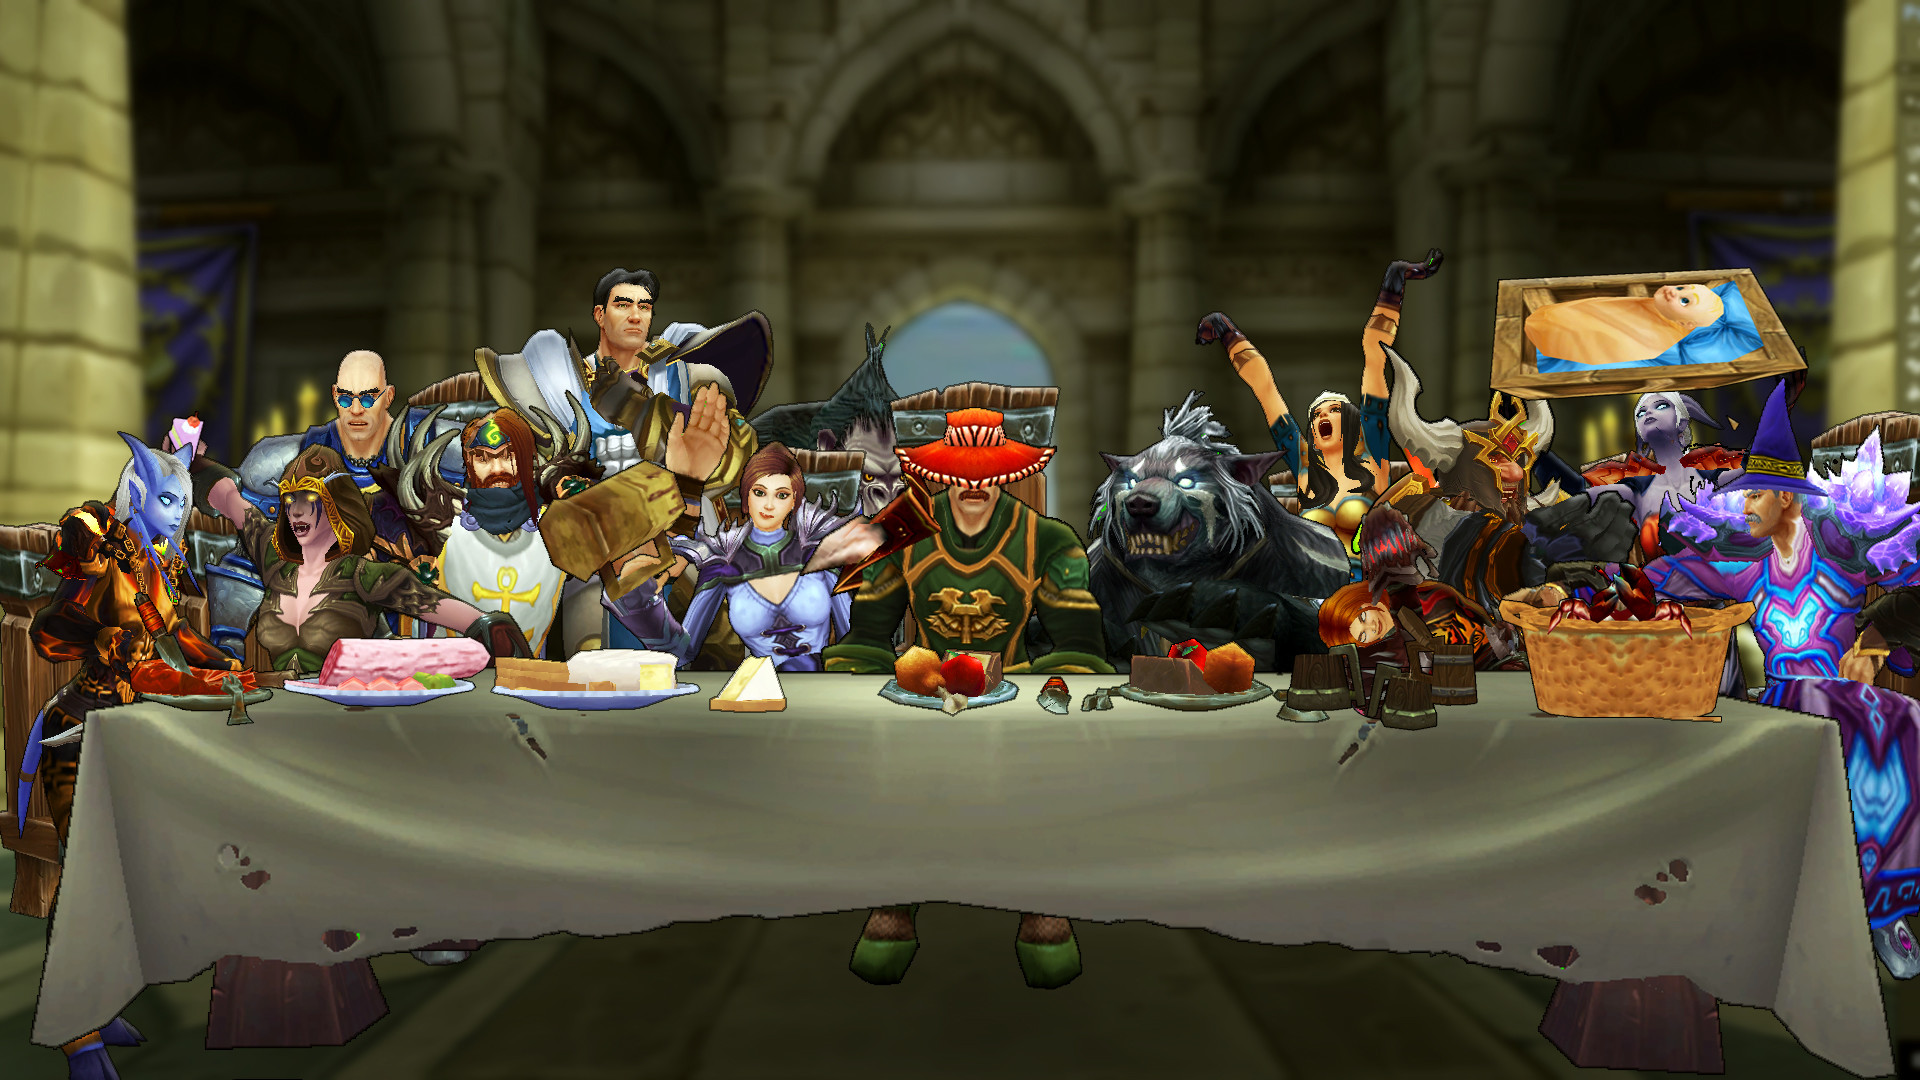 ImageI recreated "The Last Supper" as my guild Team!